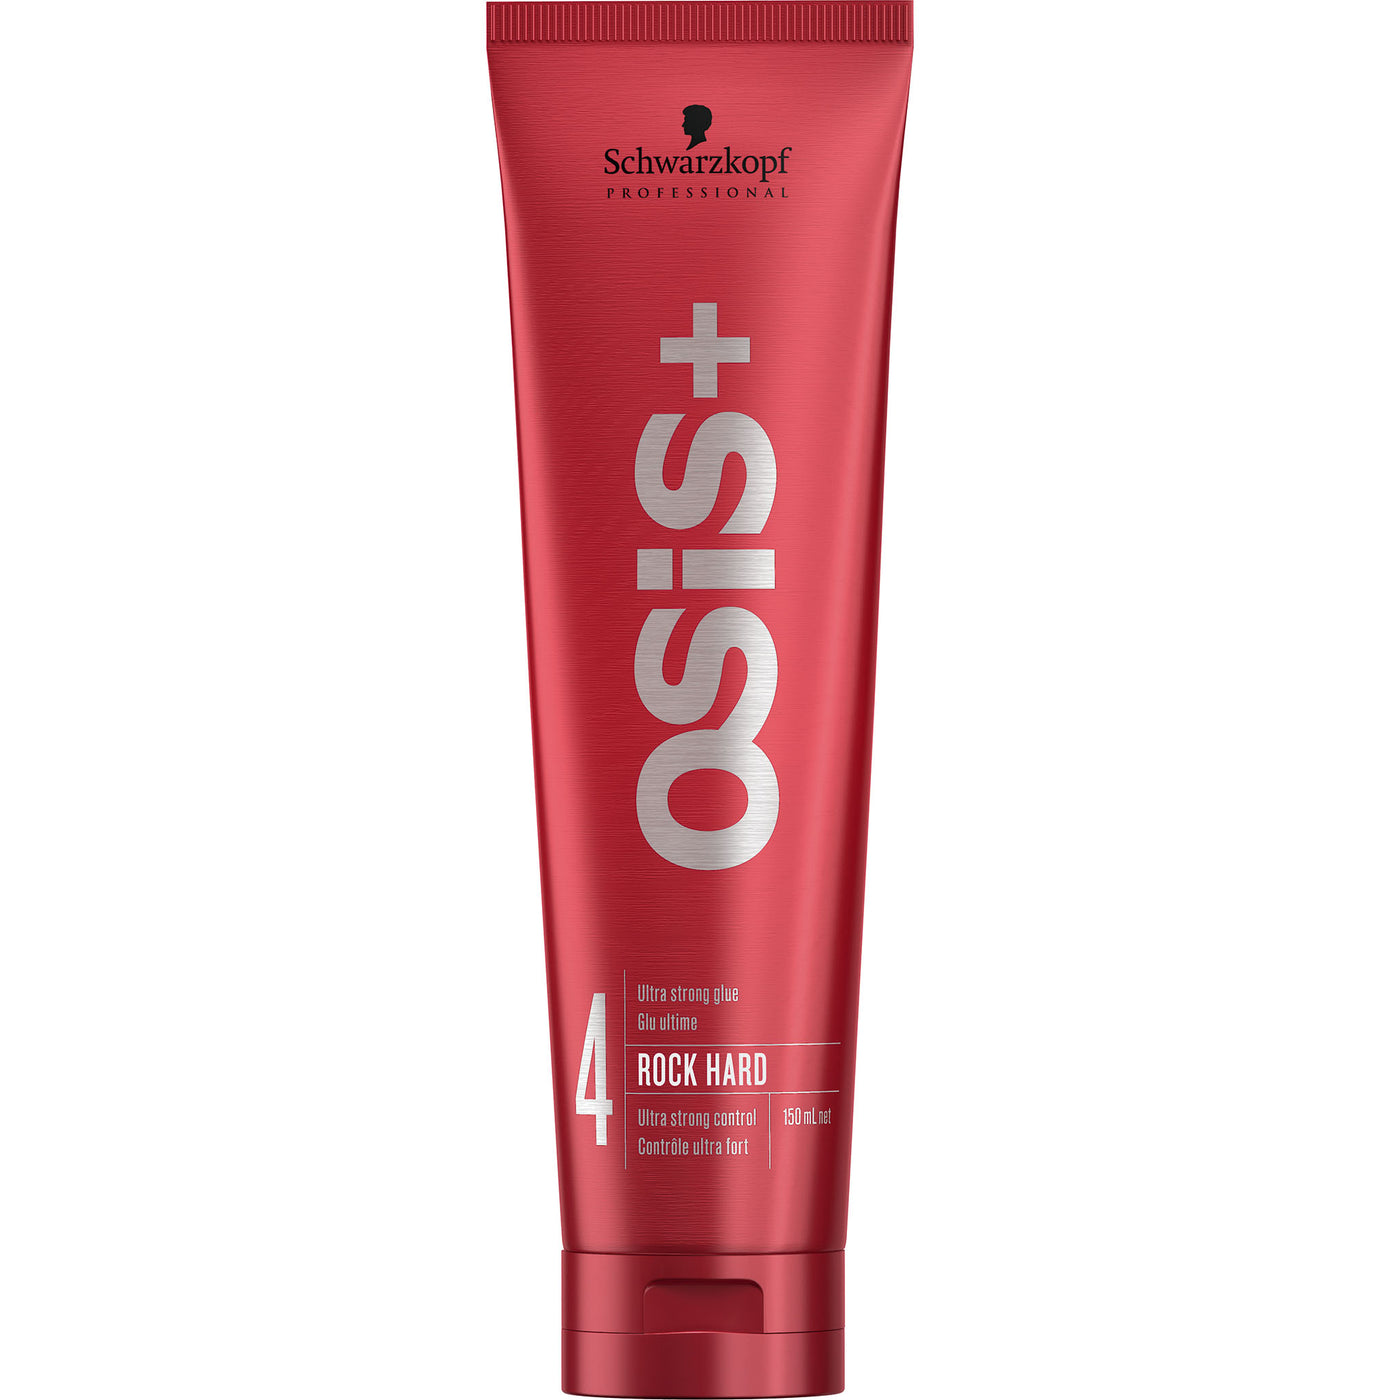 Schwarzkopf Professional OSiS+ Rock Hard - Ultra Strong Glue For Drastic Styles  150ml